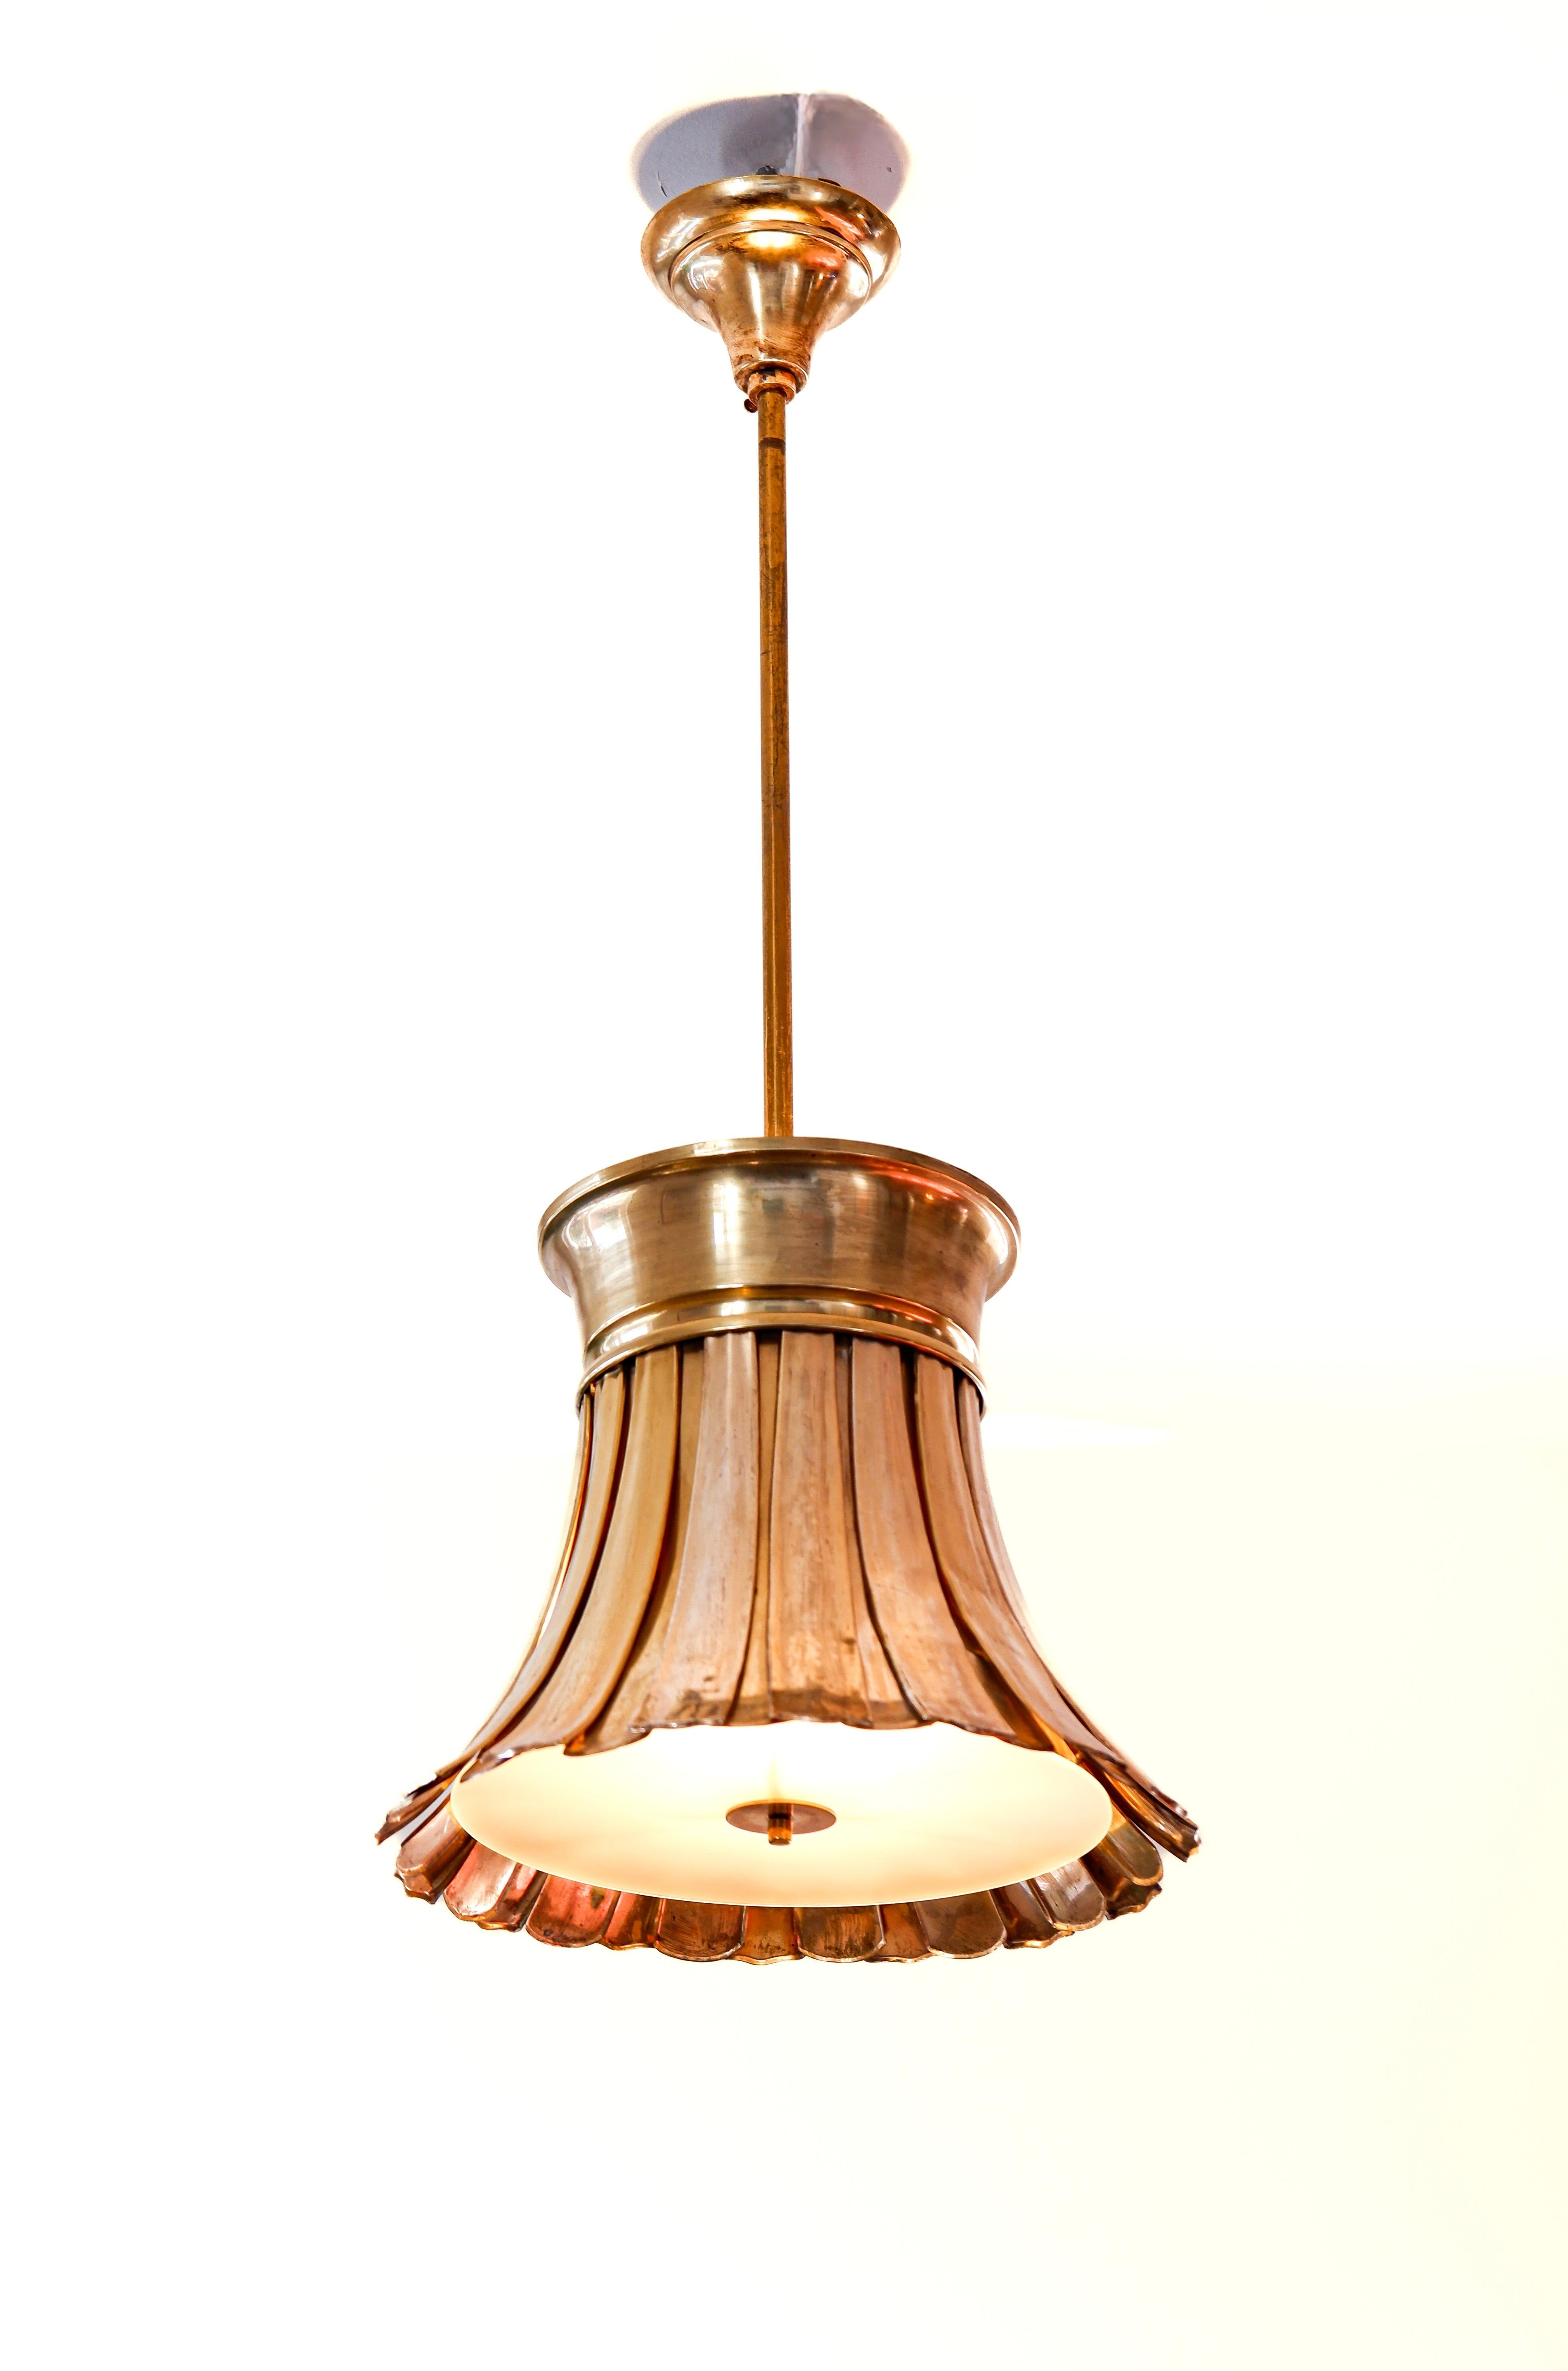 Rare and early ceiling light designed by Paavo Tynell in the late 20's for the Finnish parliament and placed there in 1929. The light is made with long brass leafs putting upon each other. The light has a incredible electrical system on the top of